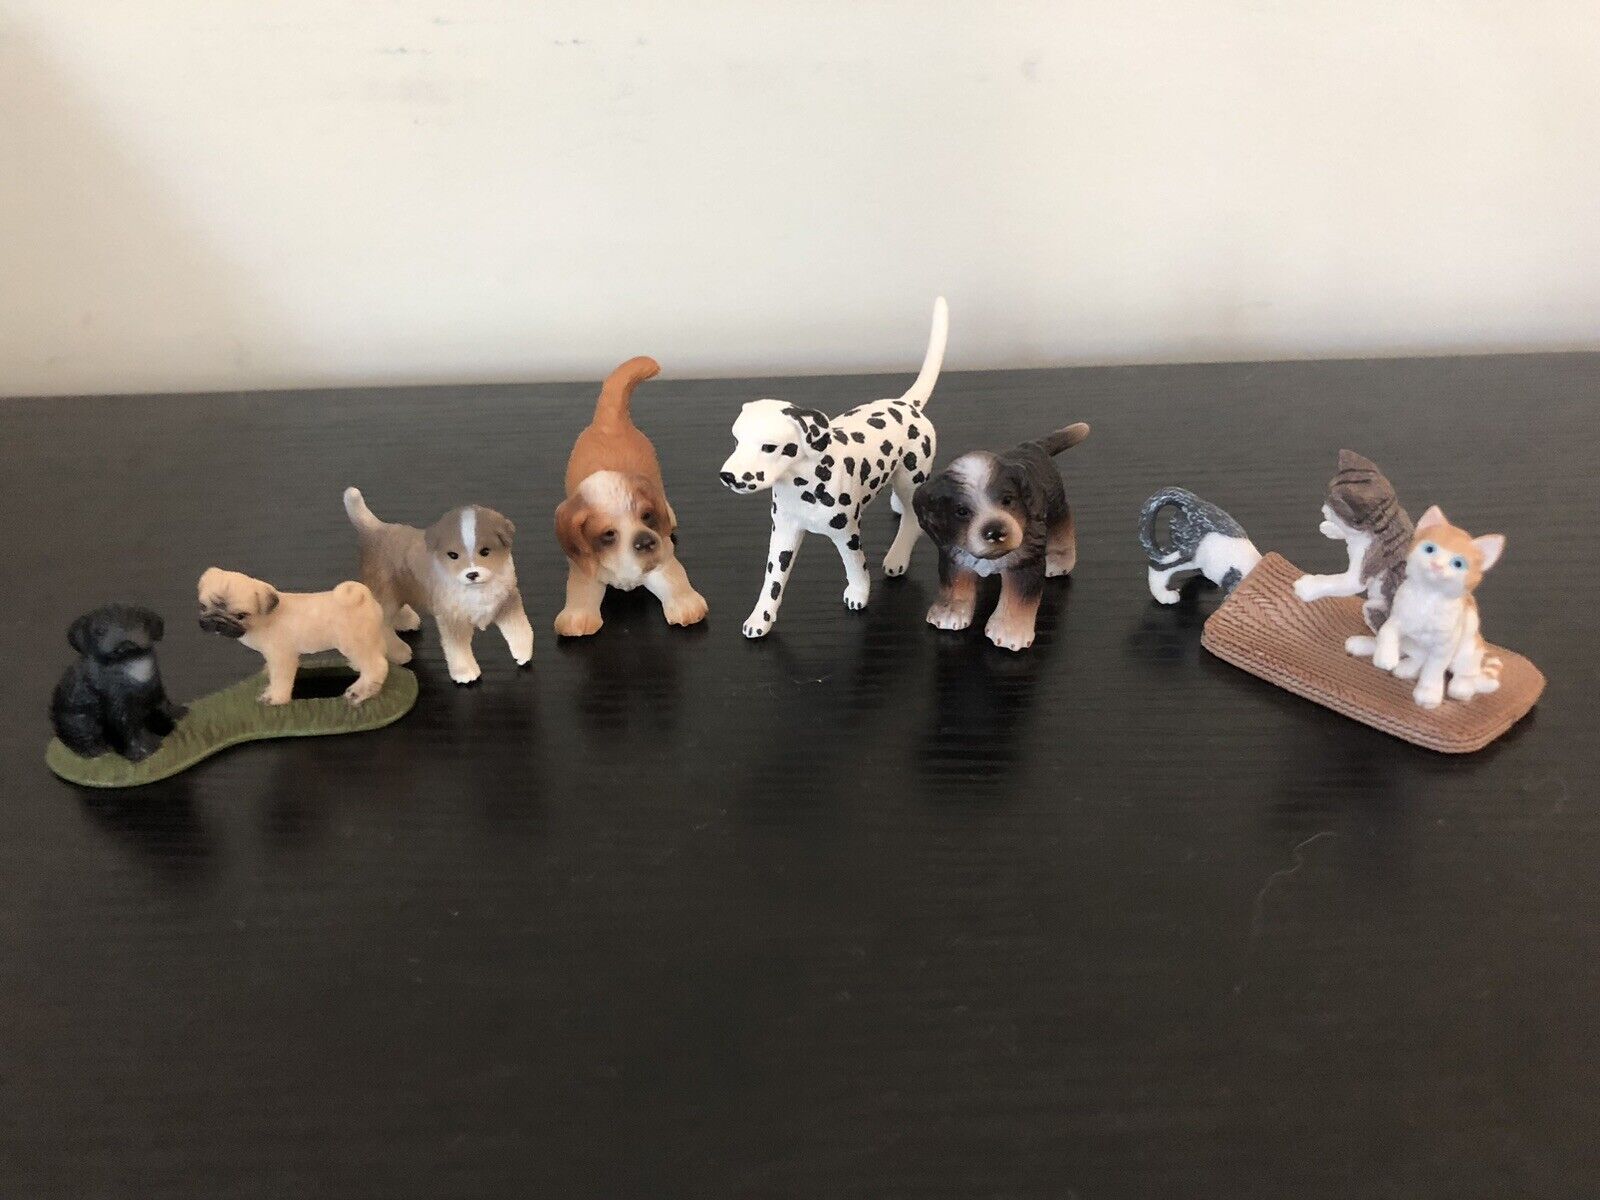 Schleich Dogs, Puppies, and Kittens Lot - Excellent Condition